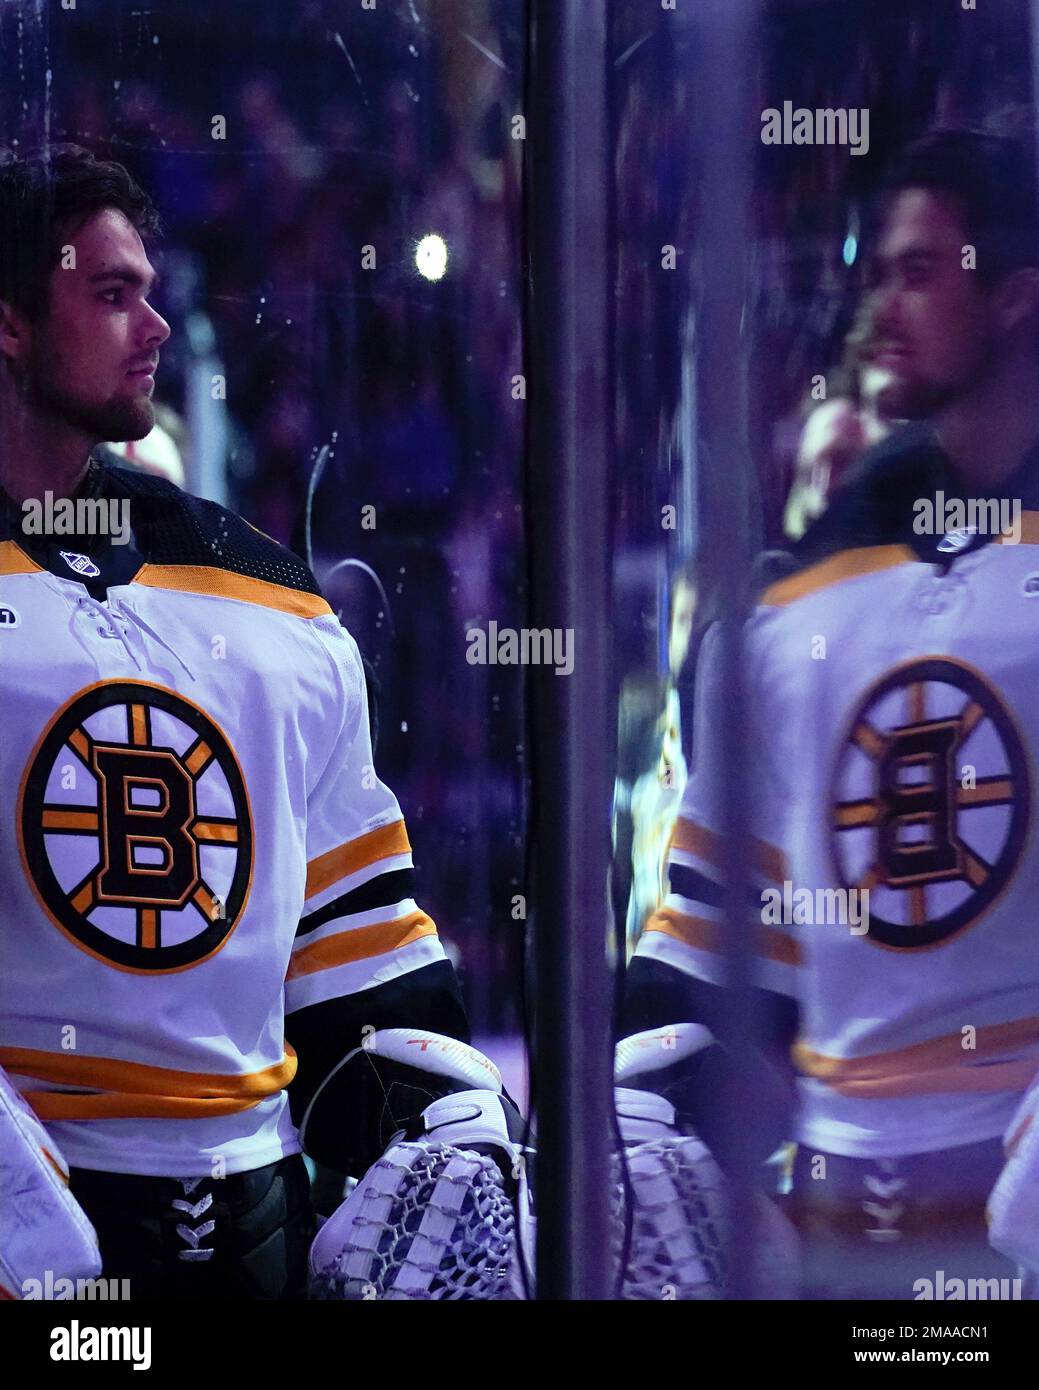 Boston Bruins goaltender Kyle Keyser is reflected by the glass during the national anthem before the teams preseason NHL hockey game against the New York Rangers, Wednesday, Oct